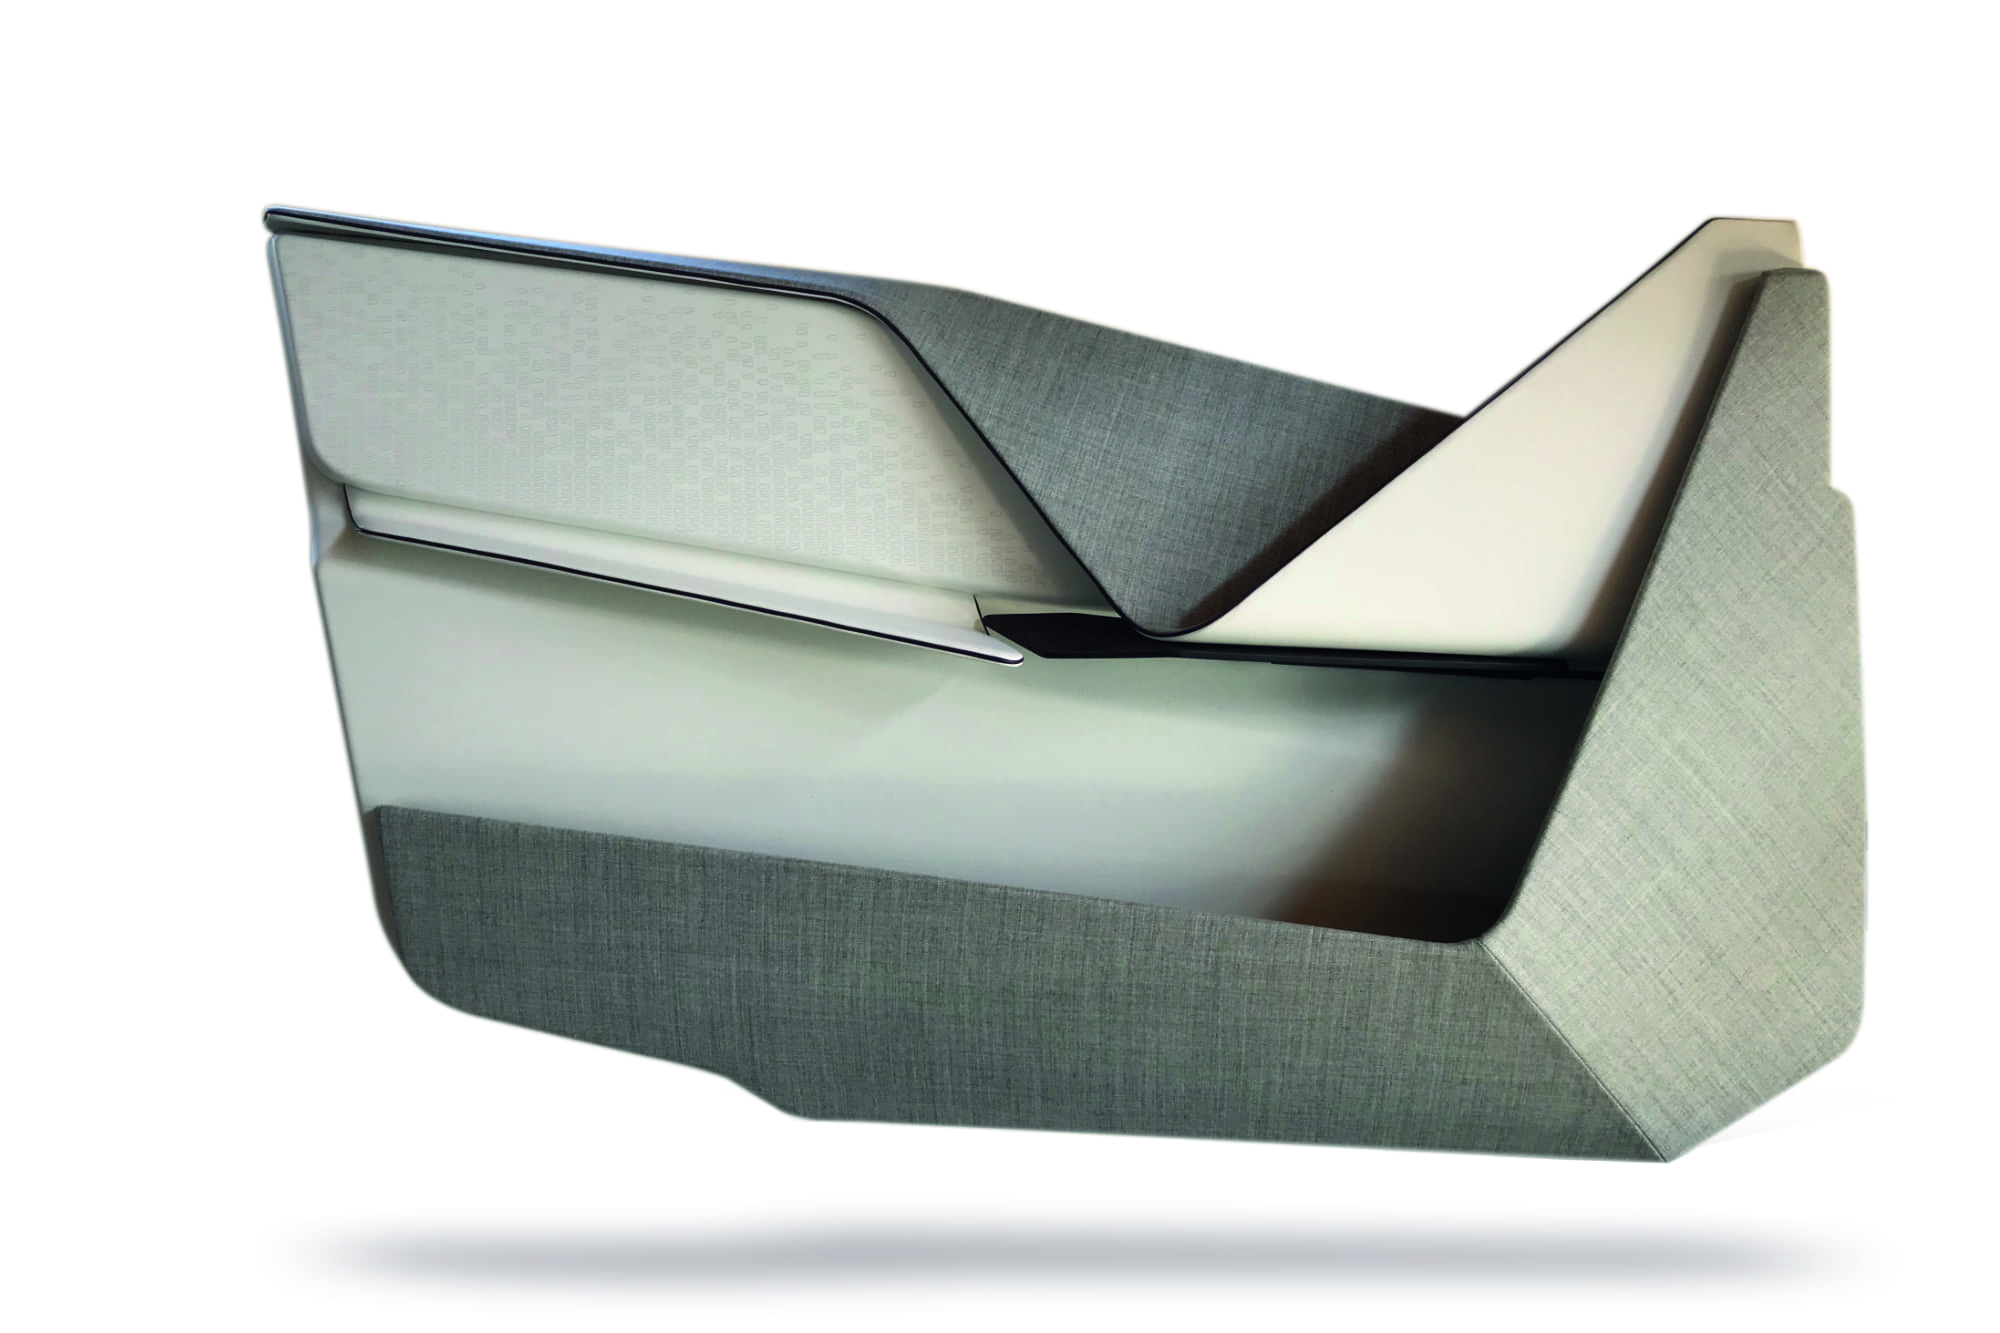 Car Interior Concept door panel in modern geometric folded shape with armrest and storage space covered with grey textured fabric